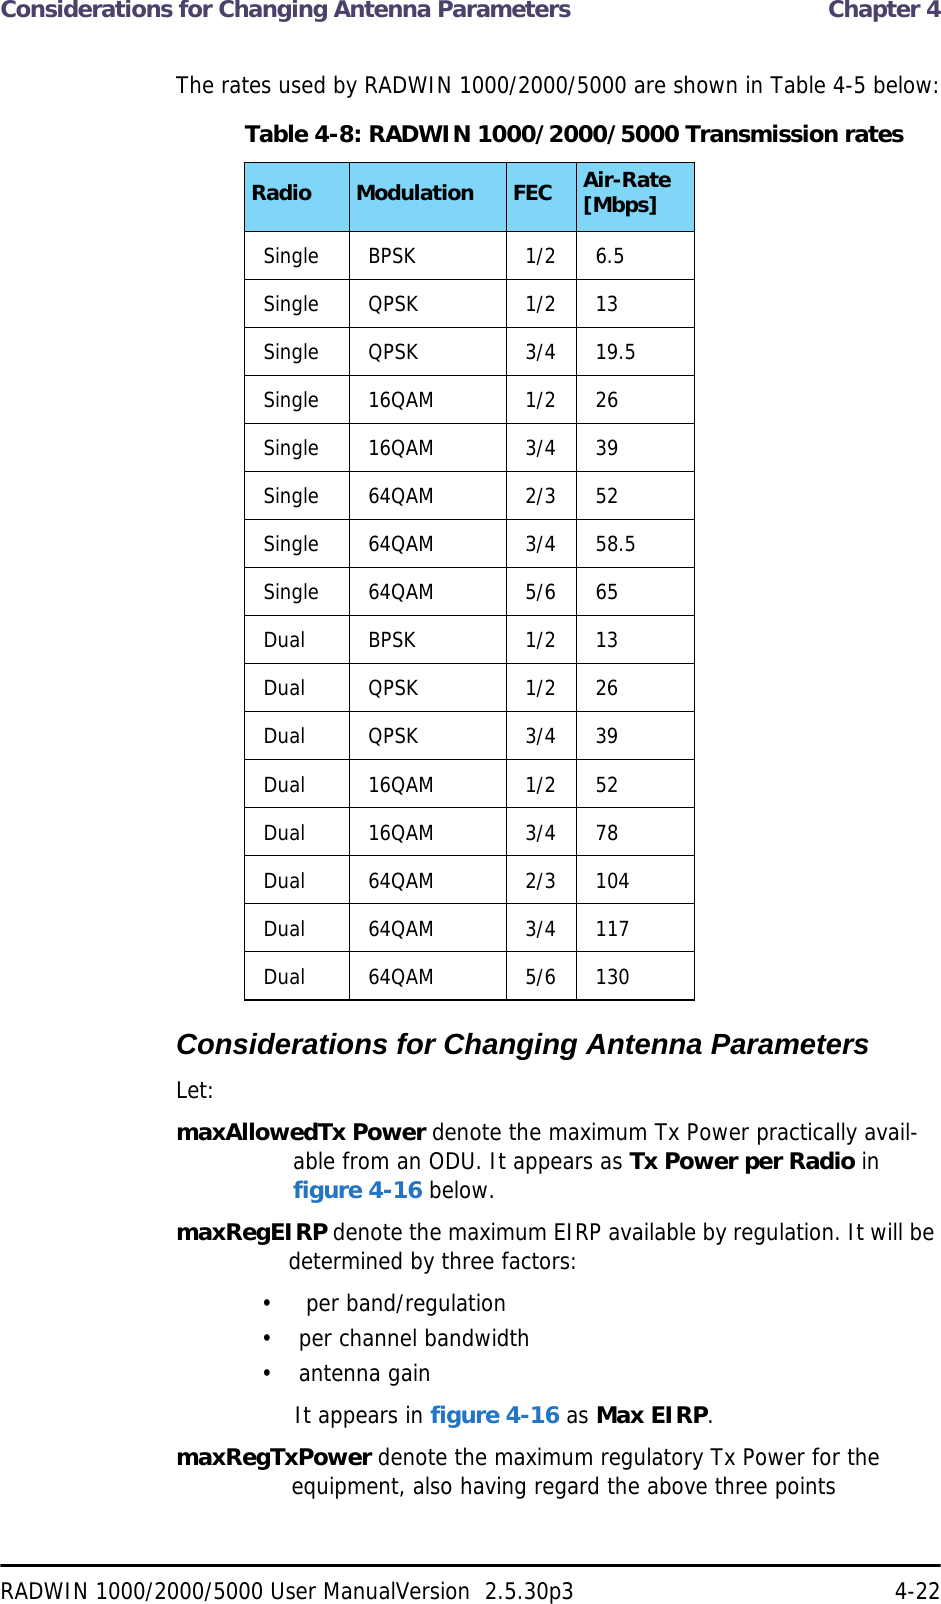 Considerations for Changing Antenna Parameters  Chapter 4RADWIN 1000/2000/5000 User ManualVersion  2.5.30p3 4-22The rates used by RADWIN 1000/2000/5000 are shown in Table 4-5 below:Considerations for Changing Antenna ParametersLet:maxAllowedTx Power denote the maximum Tx Power practically avail-able from an ODU. It appears as Tx Power per Radio in figure 4-16 below.maxRegEIRP denote the maximum EIRP available by regulation. It will be determined by three factors:•  per band/regulation• per channel bandwidth• antenna gainIt appears in figure 4-16 as Max EIRP.maxRegTxPower denote the maximum regulatory Tx Power for the equipment, also having regard the above three pointsTable 4-8: RADWIN 1000/2000/5000 Transmission ratesRadio Modulation FEC Air-Rate [Mbps]Single BPSK 1/2 6.5Single QPSK 1/2 13Single QPSK 3/4 19.5Single 16QAM 1/2 26Single 16QAM 3/4 39Single 64QAM 2/3 52Single 64QAM 3/4 58.5Single 64QAM 5/6 65Dual BPSK 1/2 13Dual QPSK 1/2 26Dual QPSK 3/4 39Dual 16QAM 1/2 52Dual 16QAM 3/4 78Dual 64QAM 2/3 104Dual 64QAM 3/4 117Dual 64QAM 5/6 130